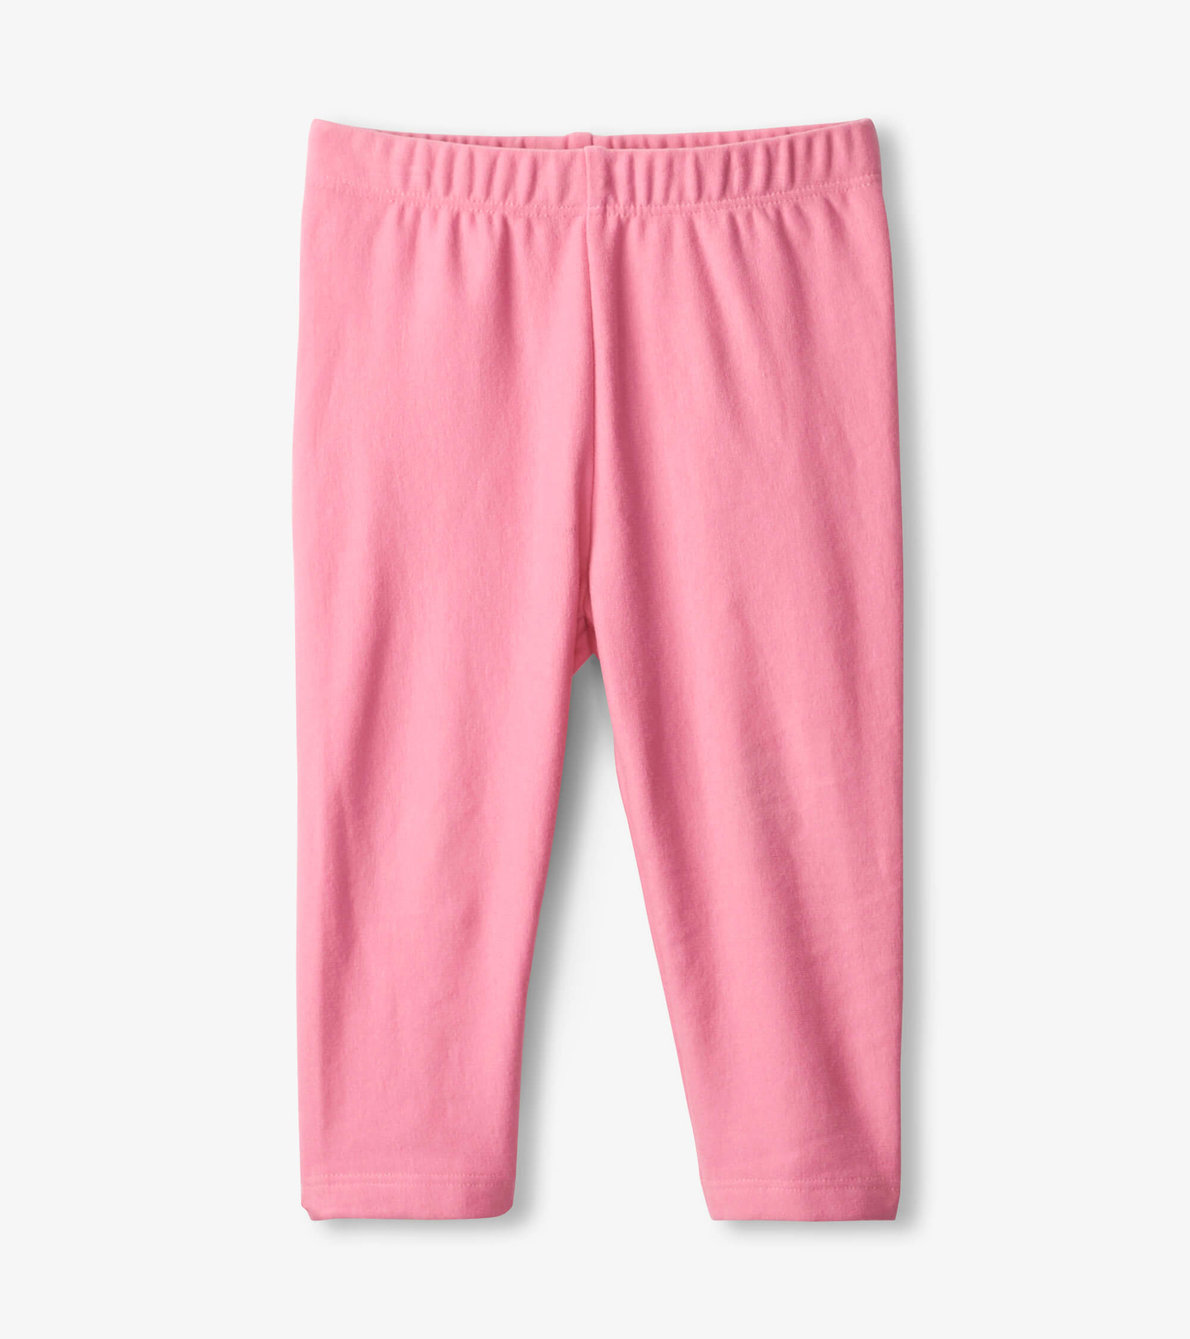 View larger image of Pink Cozy Leggings